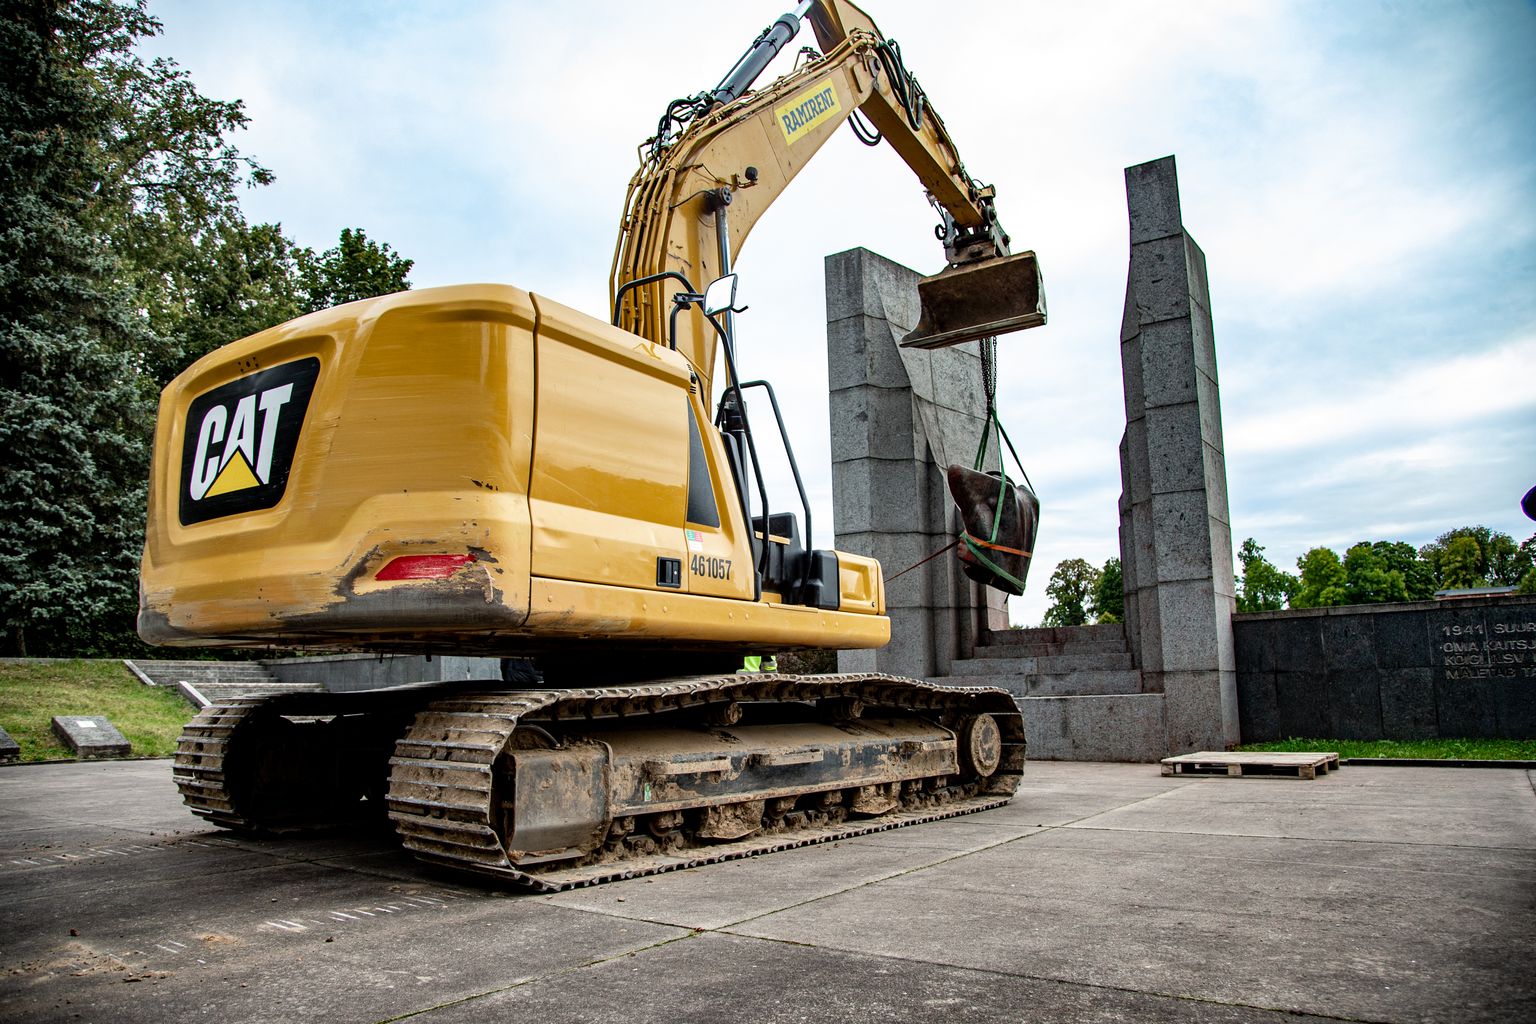 The Estonian parliament at a sitting on Wednesday passed amendments to the Building Code that create a basis for the removal of Soviet-era monuments.